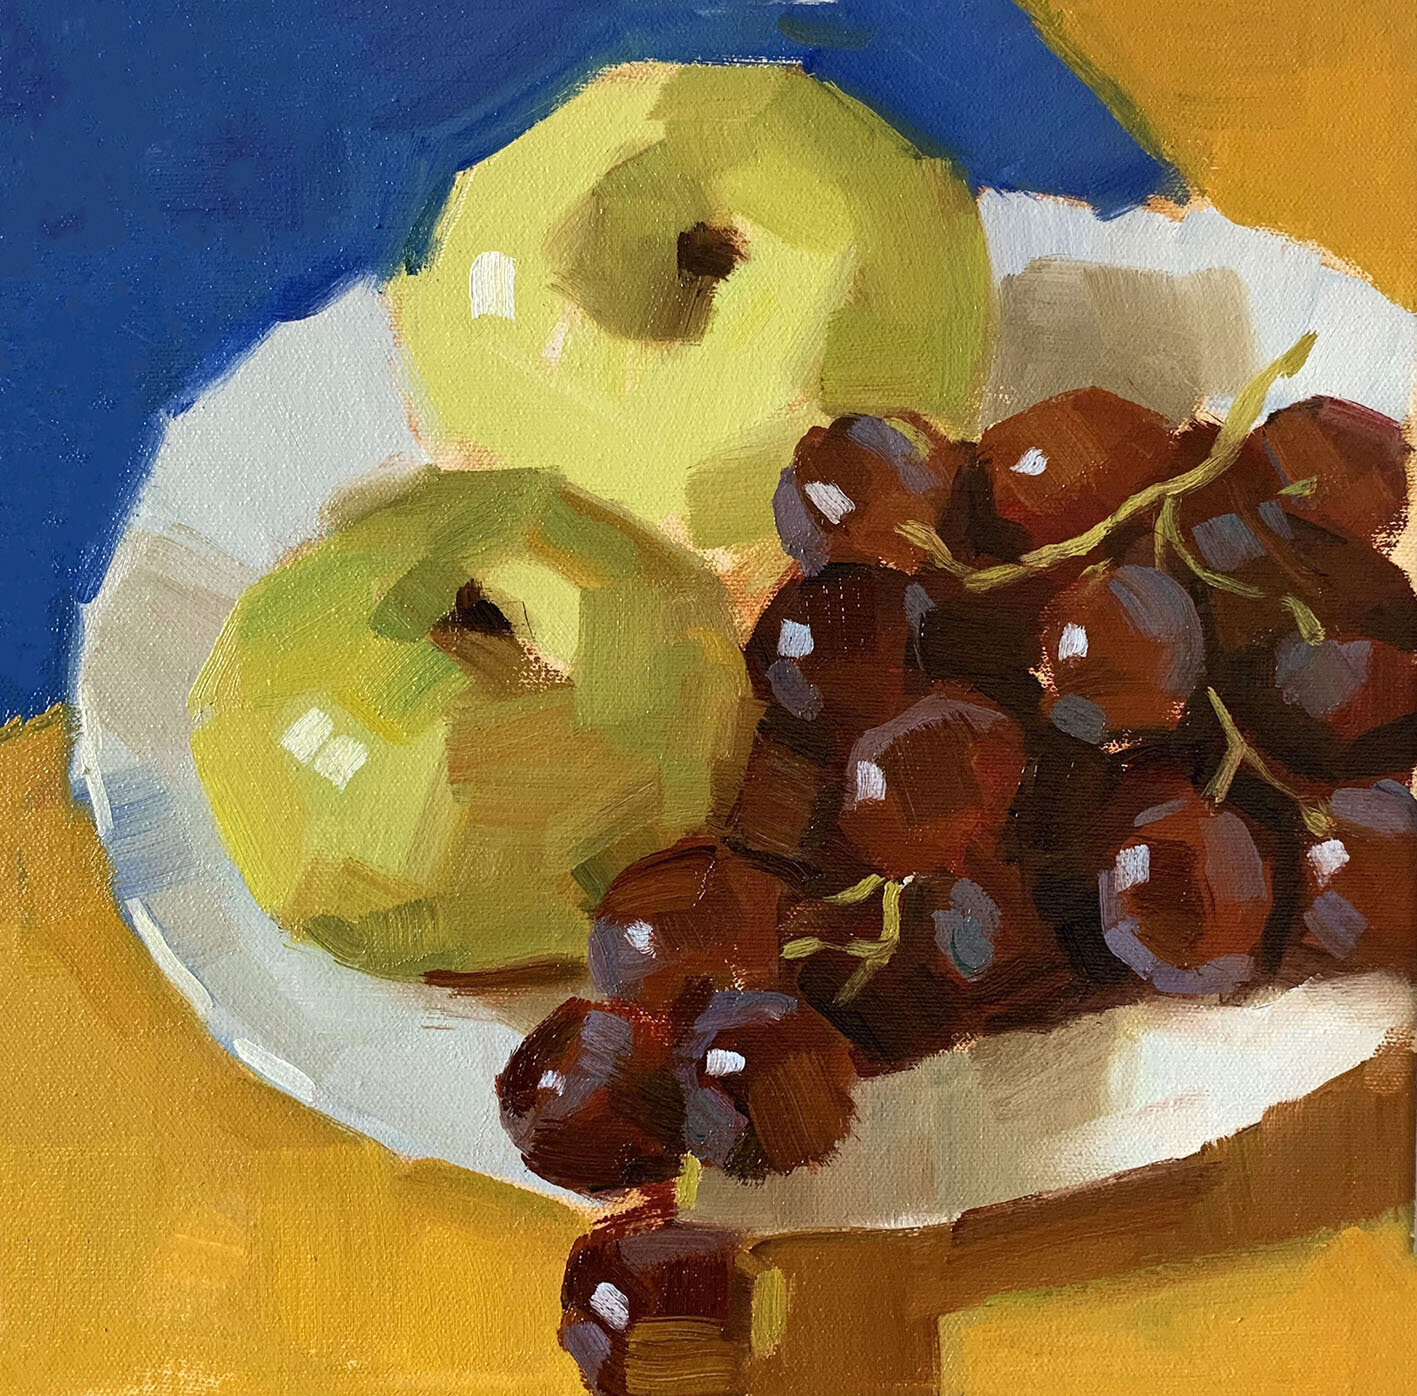 Red Grapes and Green Apples